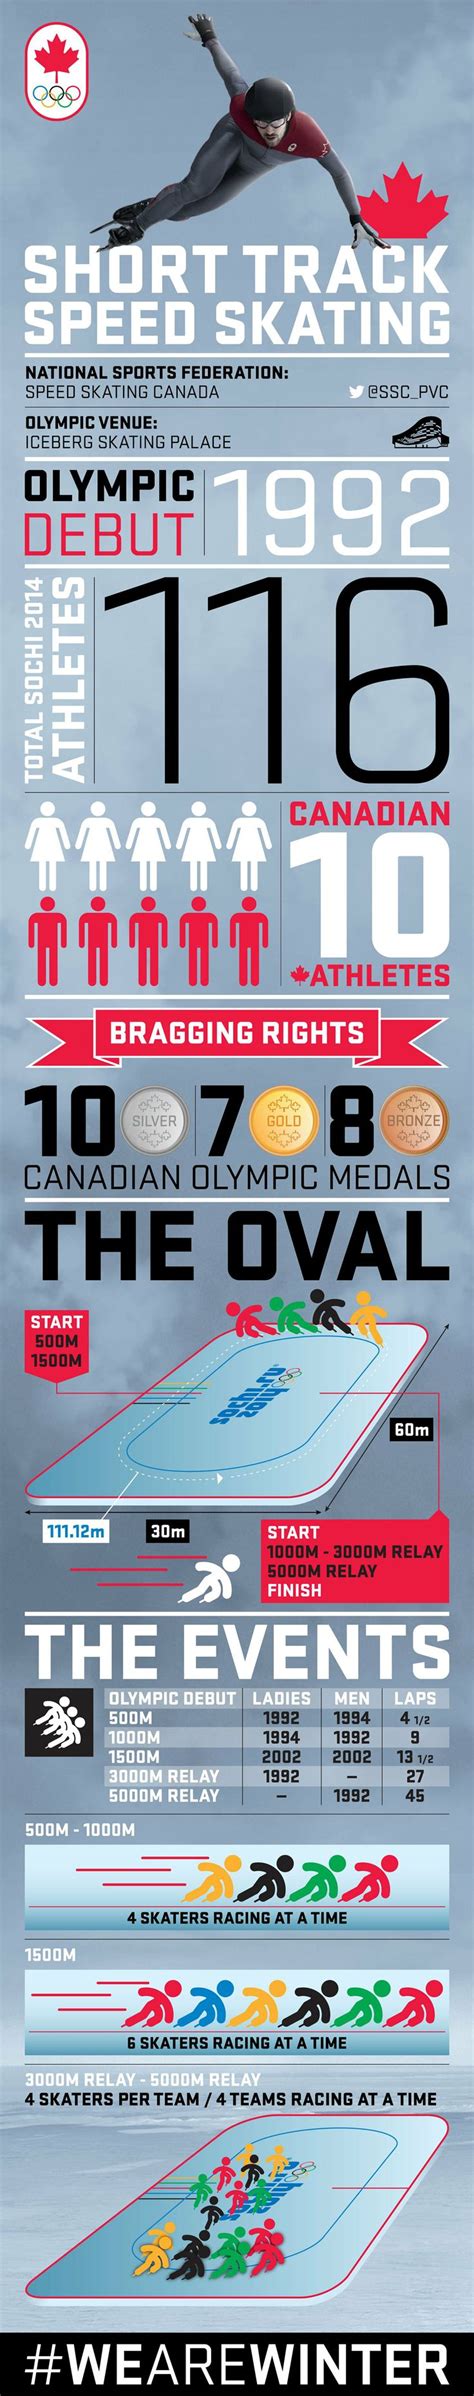 Your Guide To Olympic Short Track Speed Skating Infographic Olympic